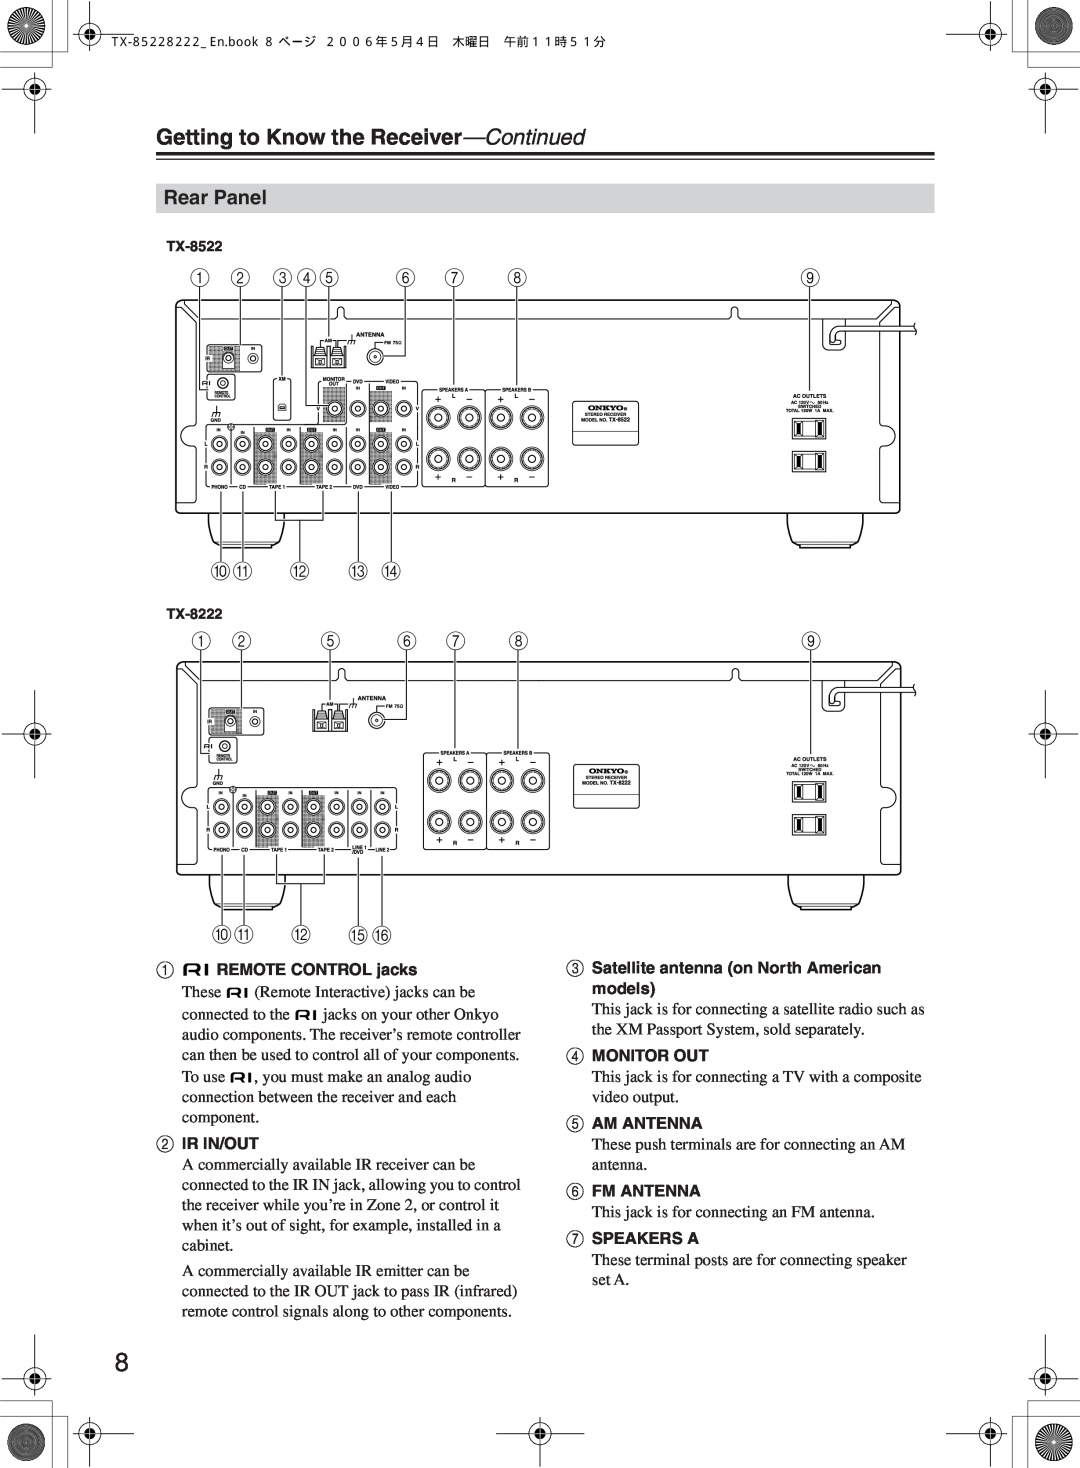 Onkyo TX-8222, TX-8522 instruction manual Rear Panel, Getting to Know the Receiver-Continued 